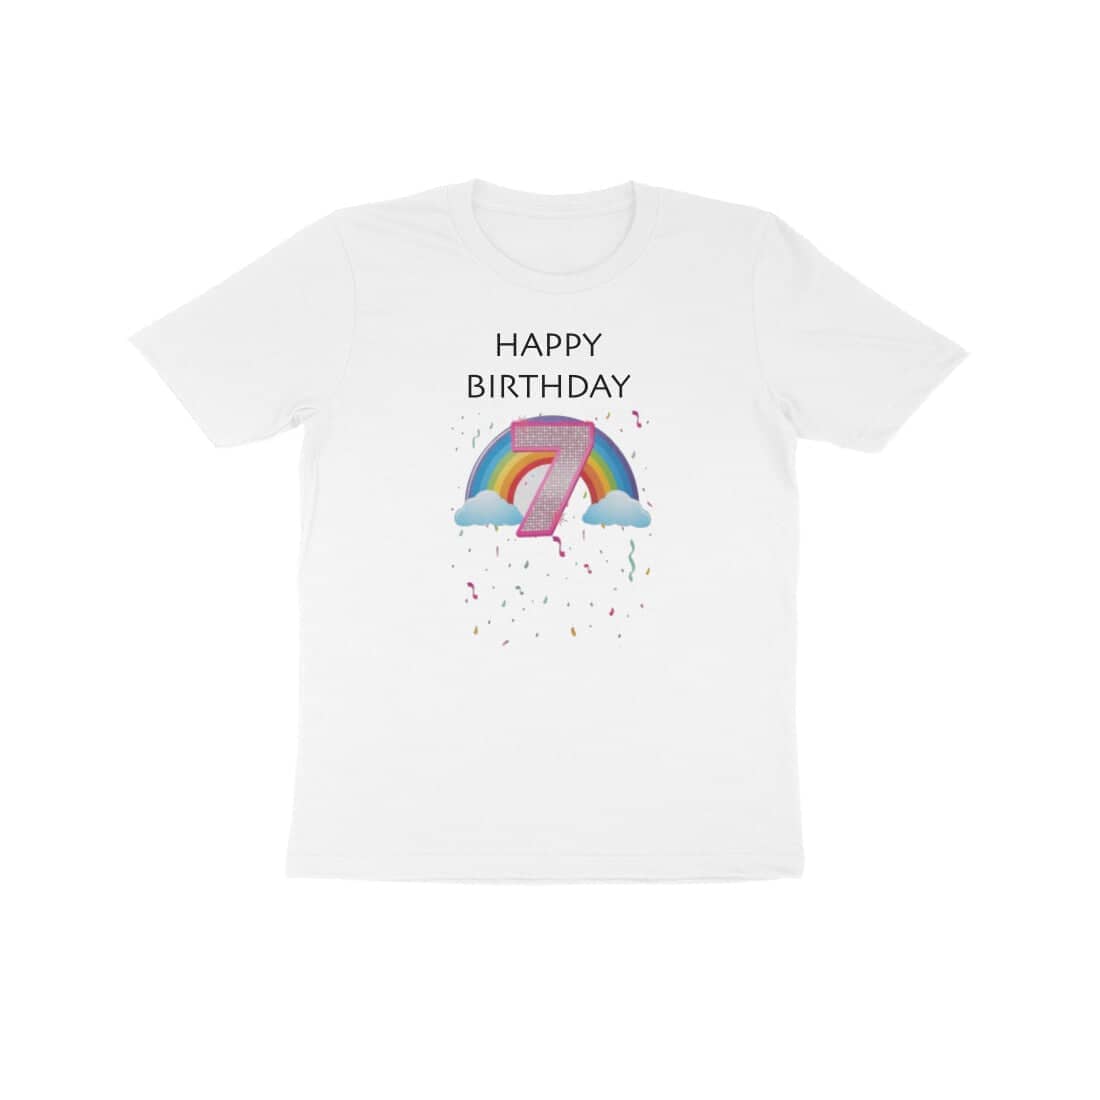 Happy 7th Birthday Special White T Shirt for Kids Printrove White 8 